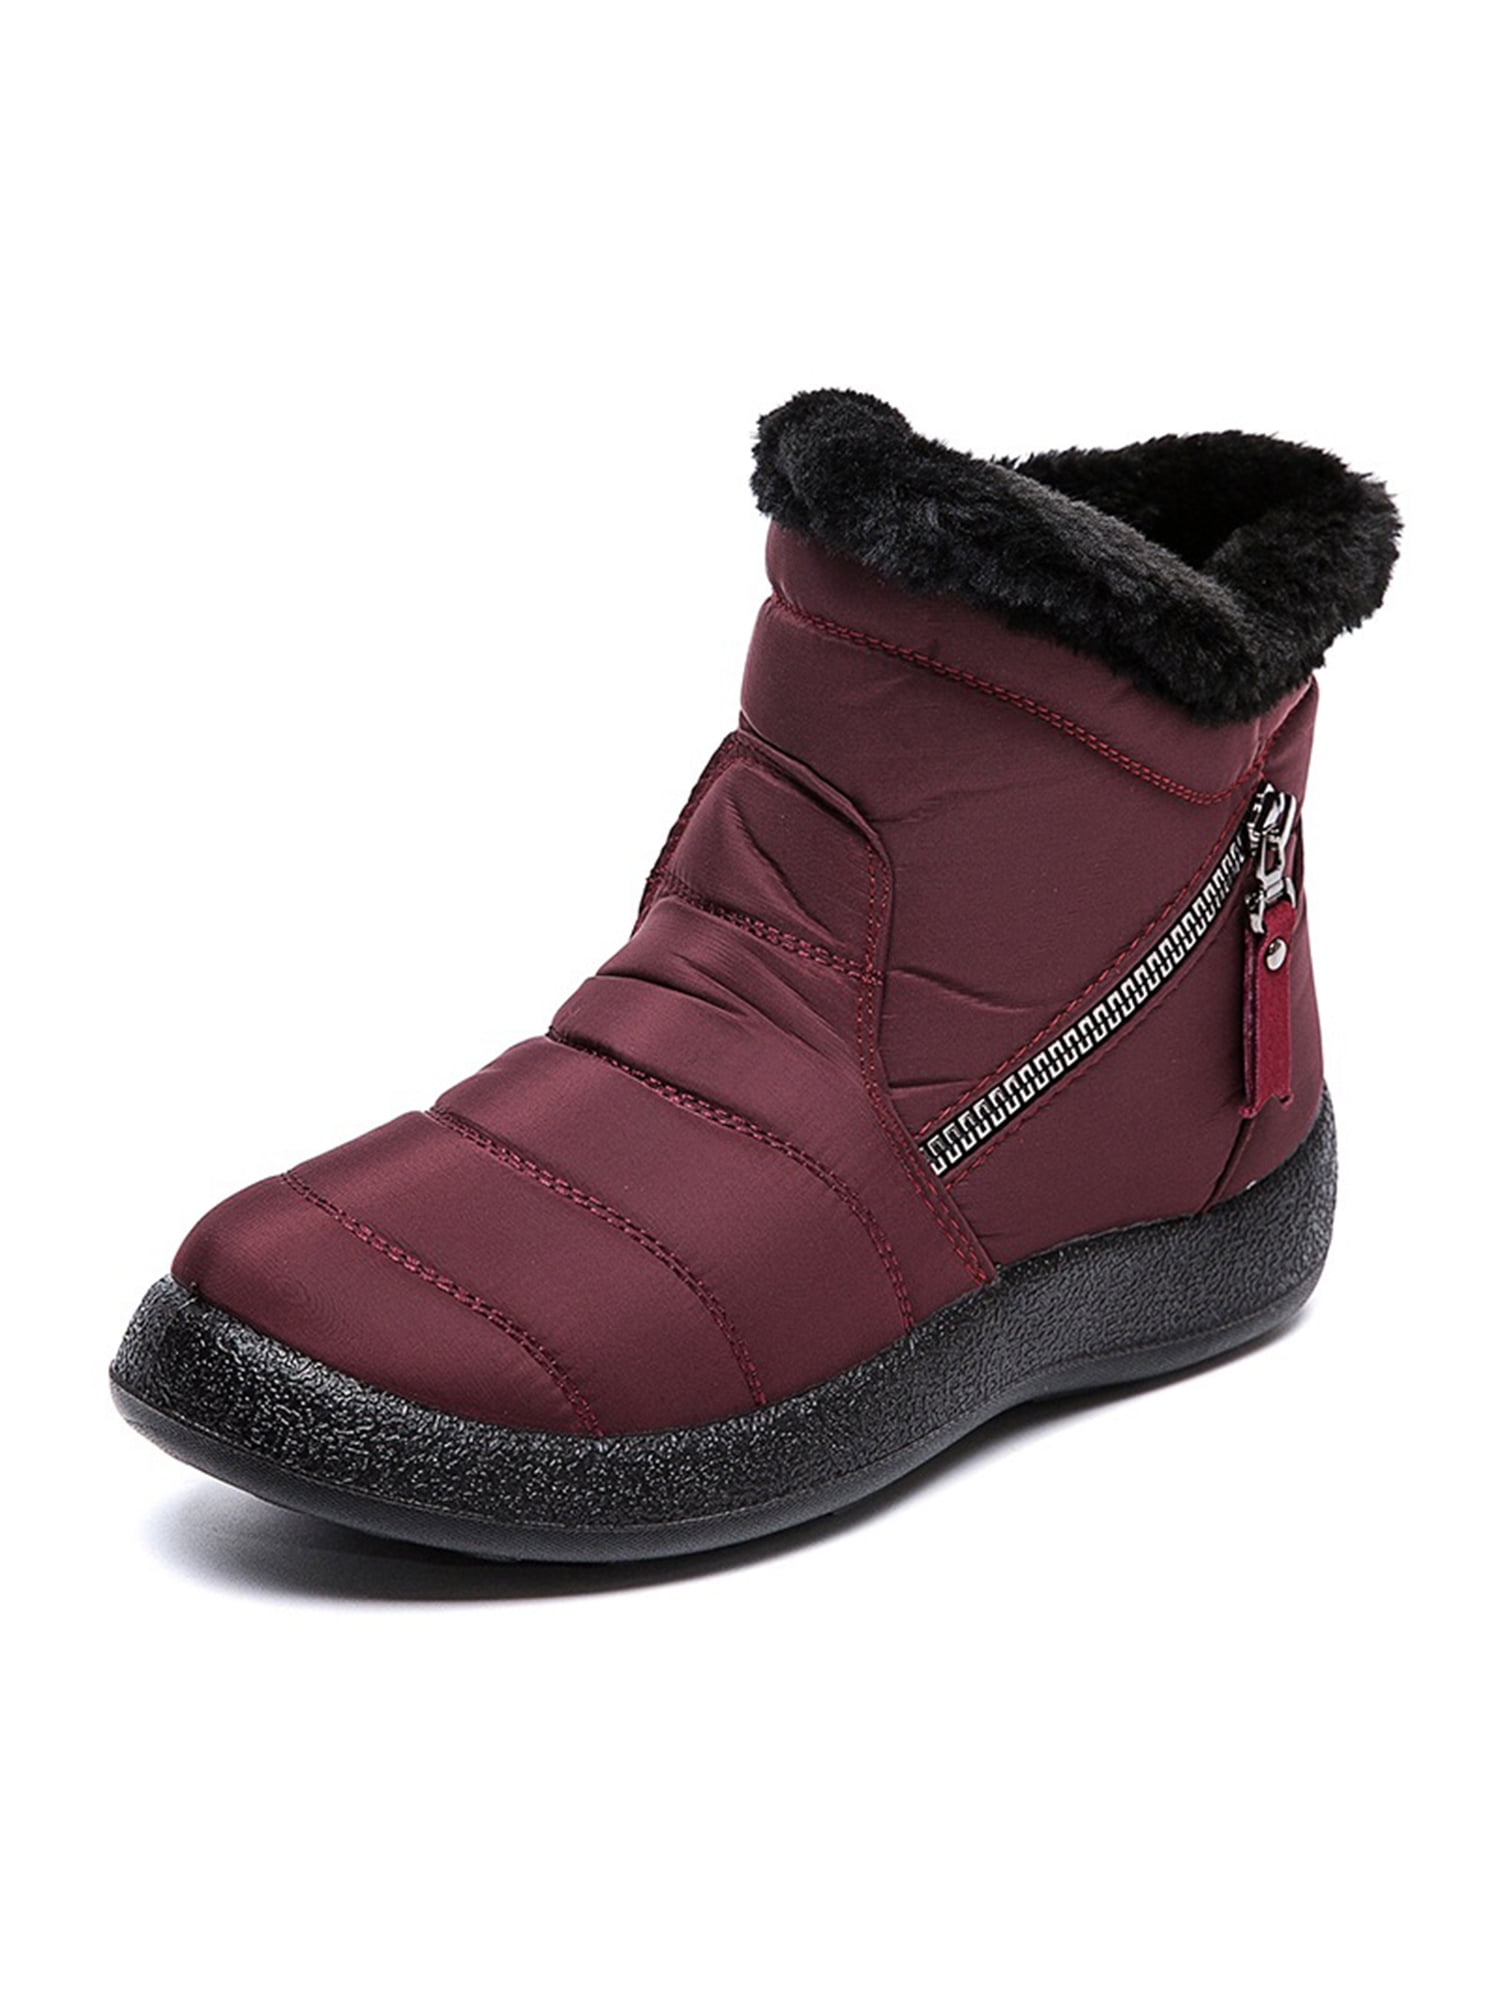 Details about   Chic Womens Furry Winter Warm Ankle Boots High Chunky Heels Lace-up ankle boots